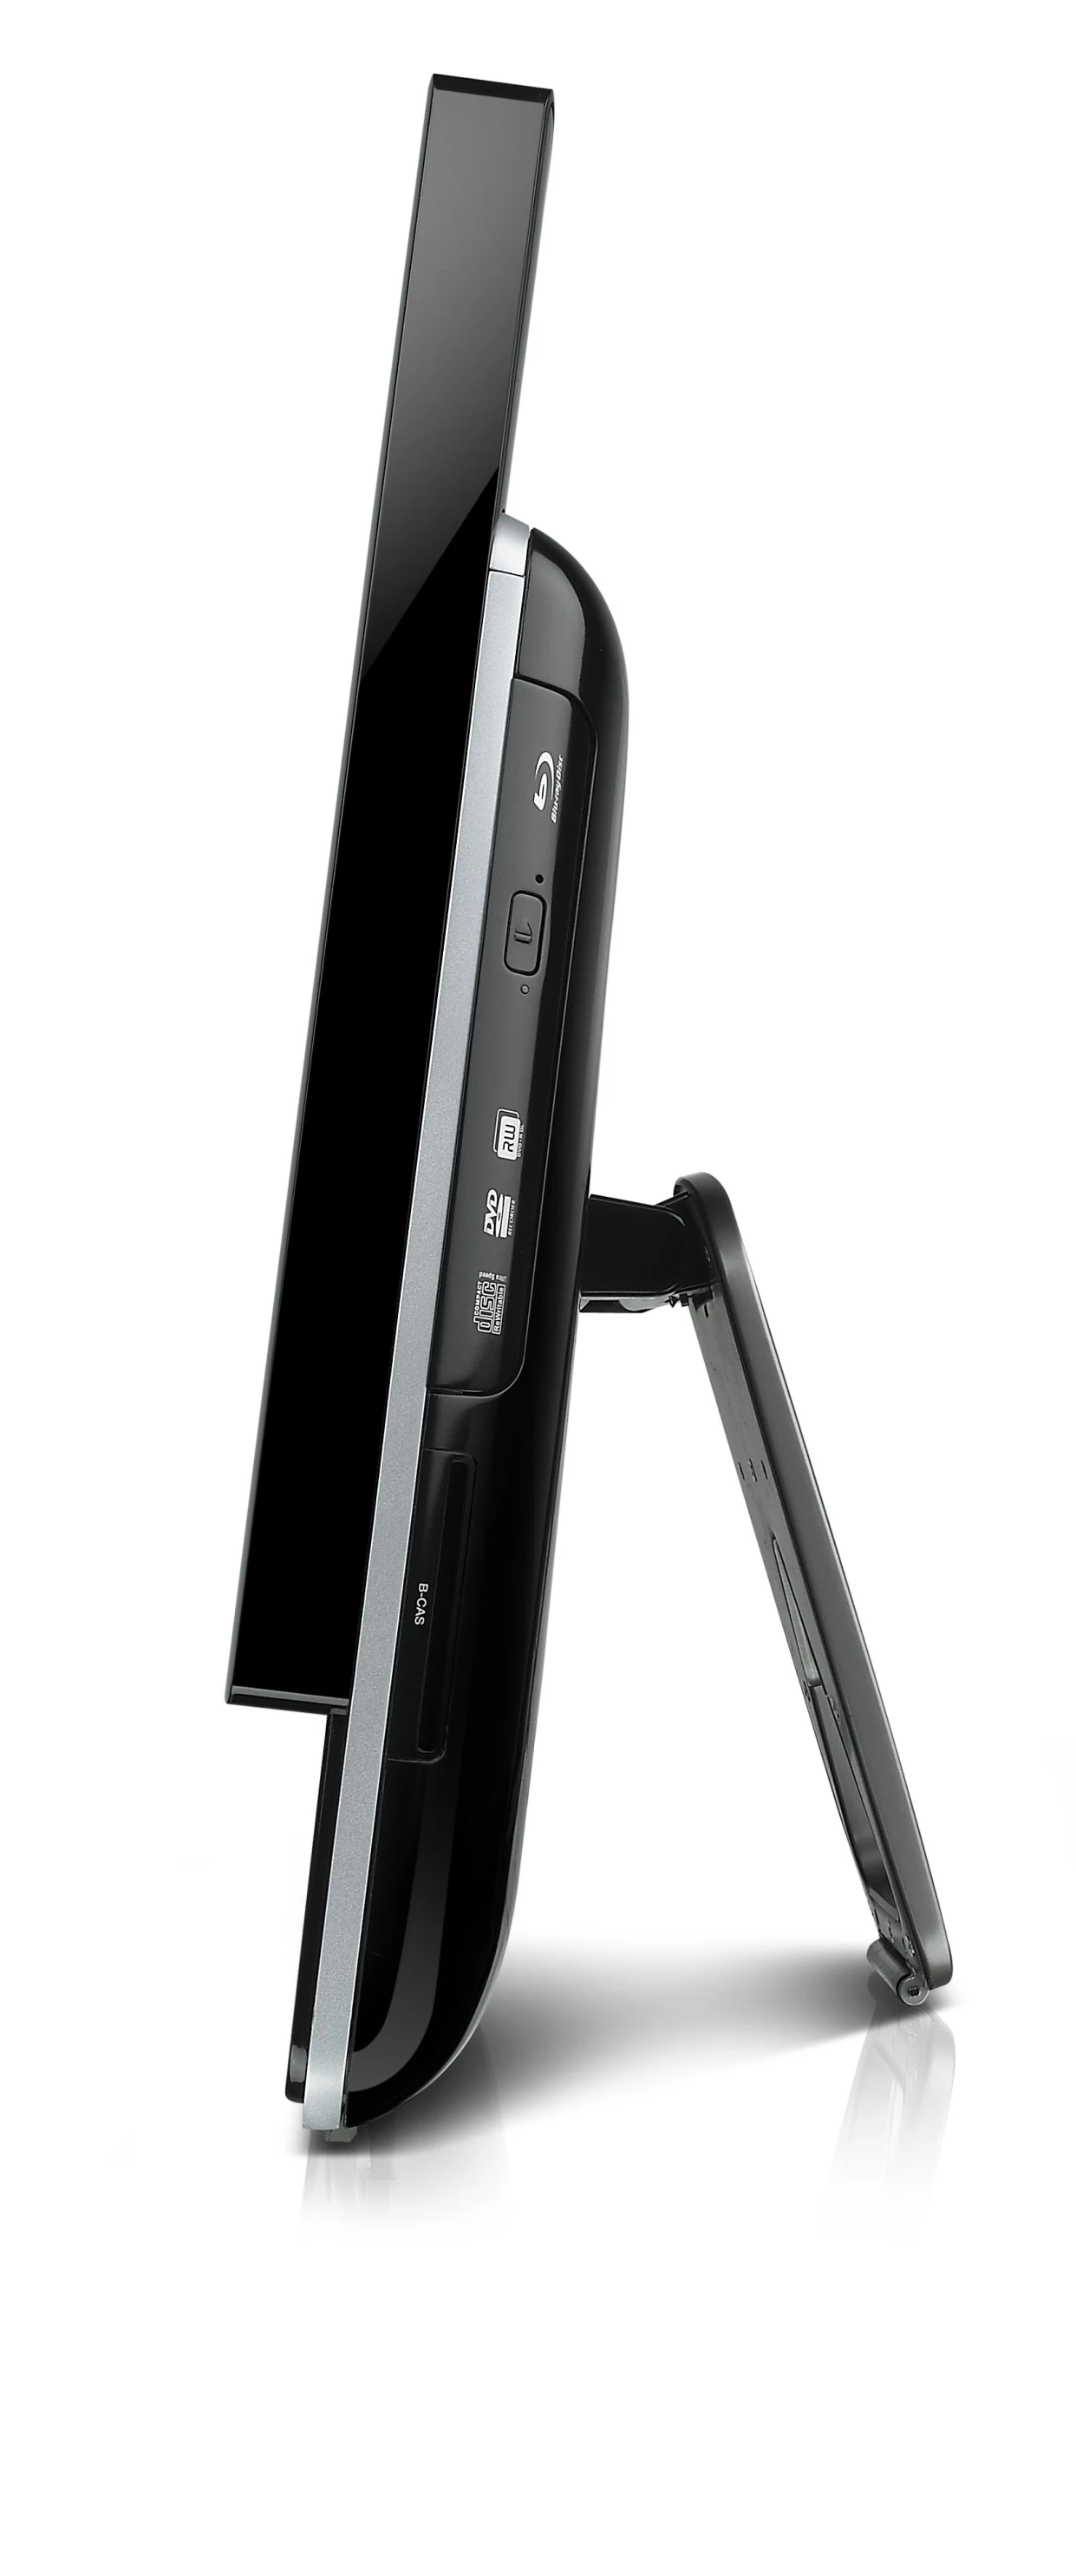 a computer monitor that is on a black stand